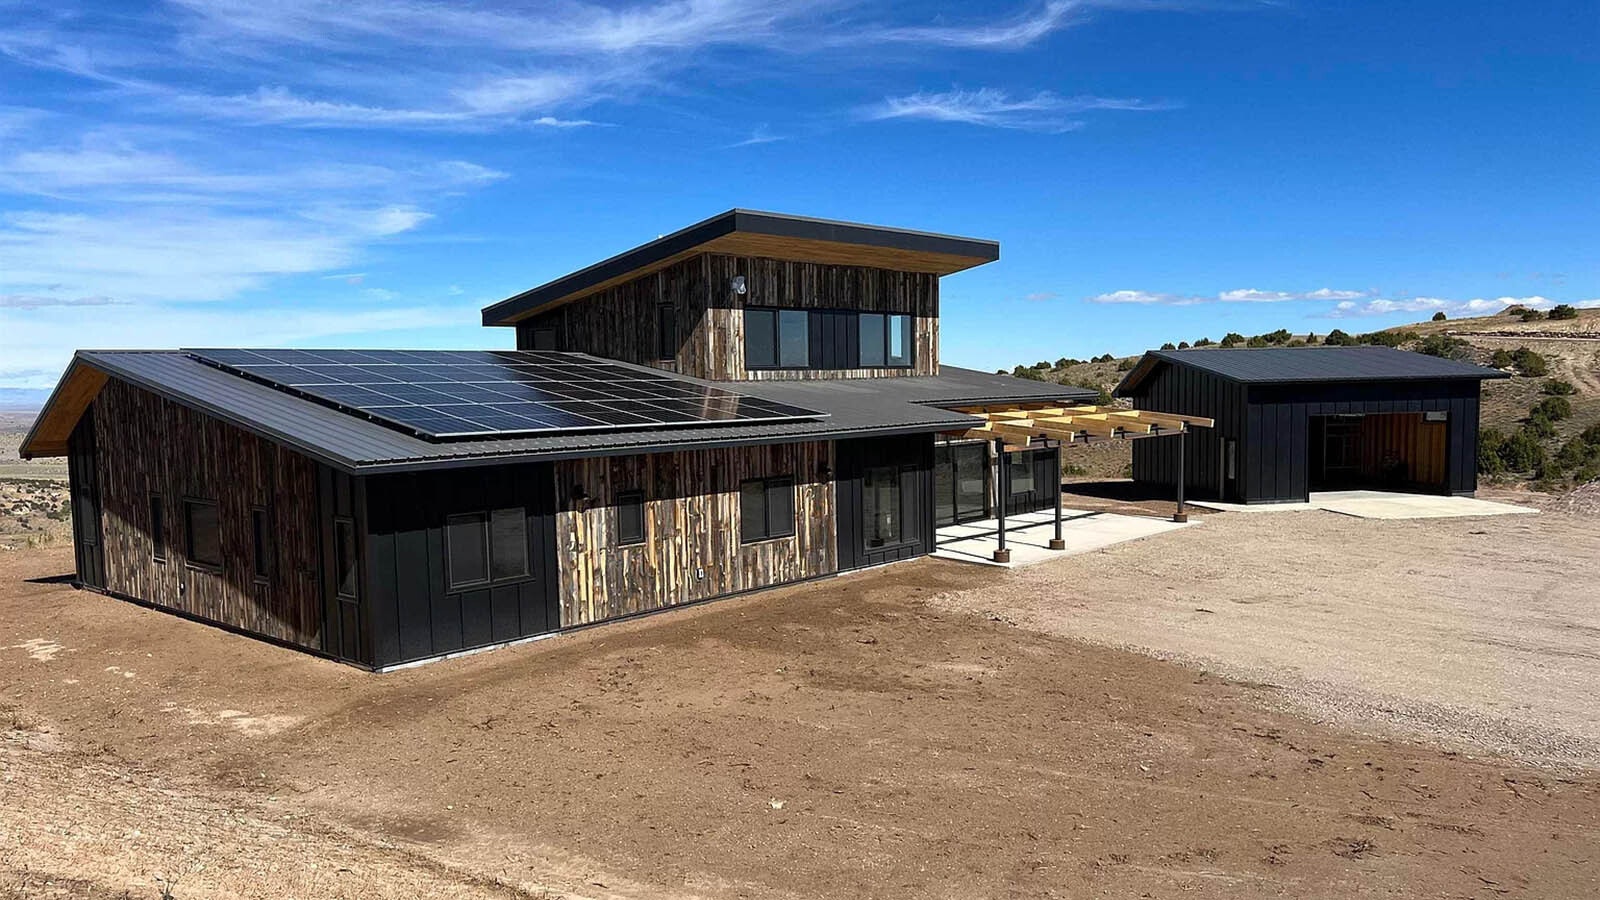 The net zero house has a modern look with materials and design that fit well with Wyoming and a rural landscape.